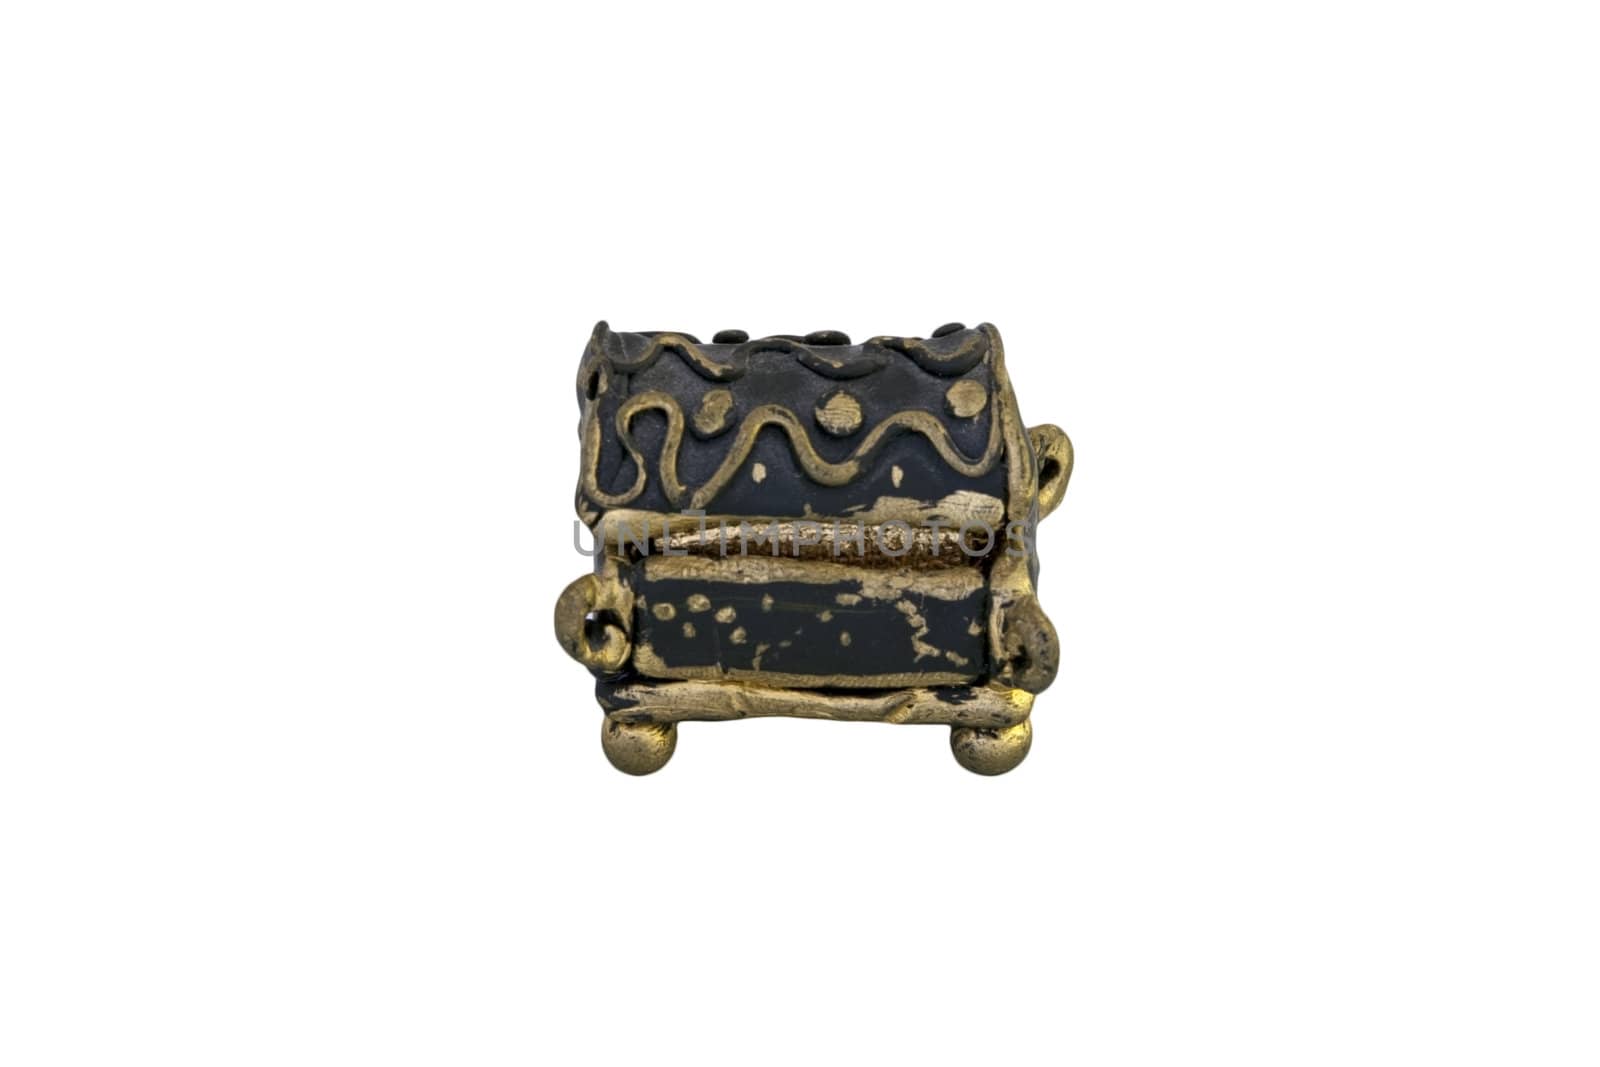 A small, old treasure chest on white background